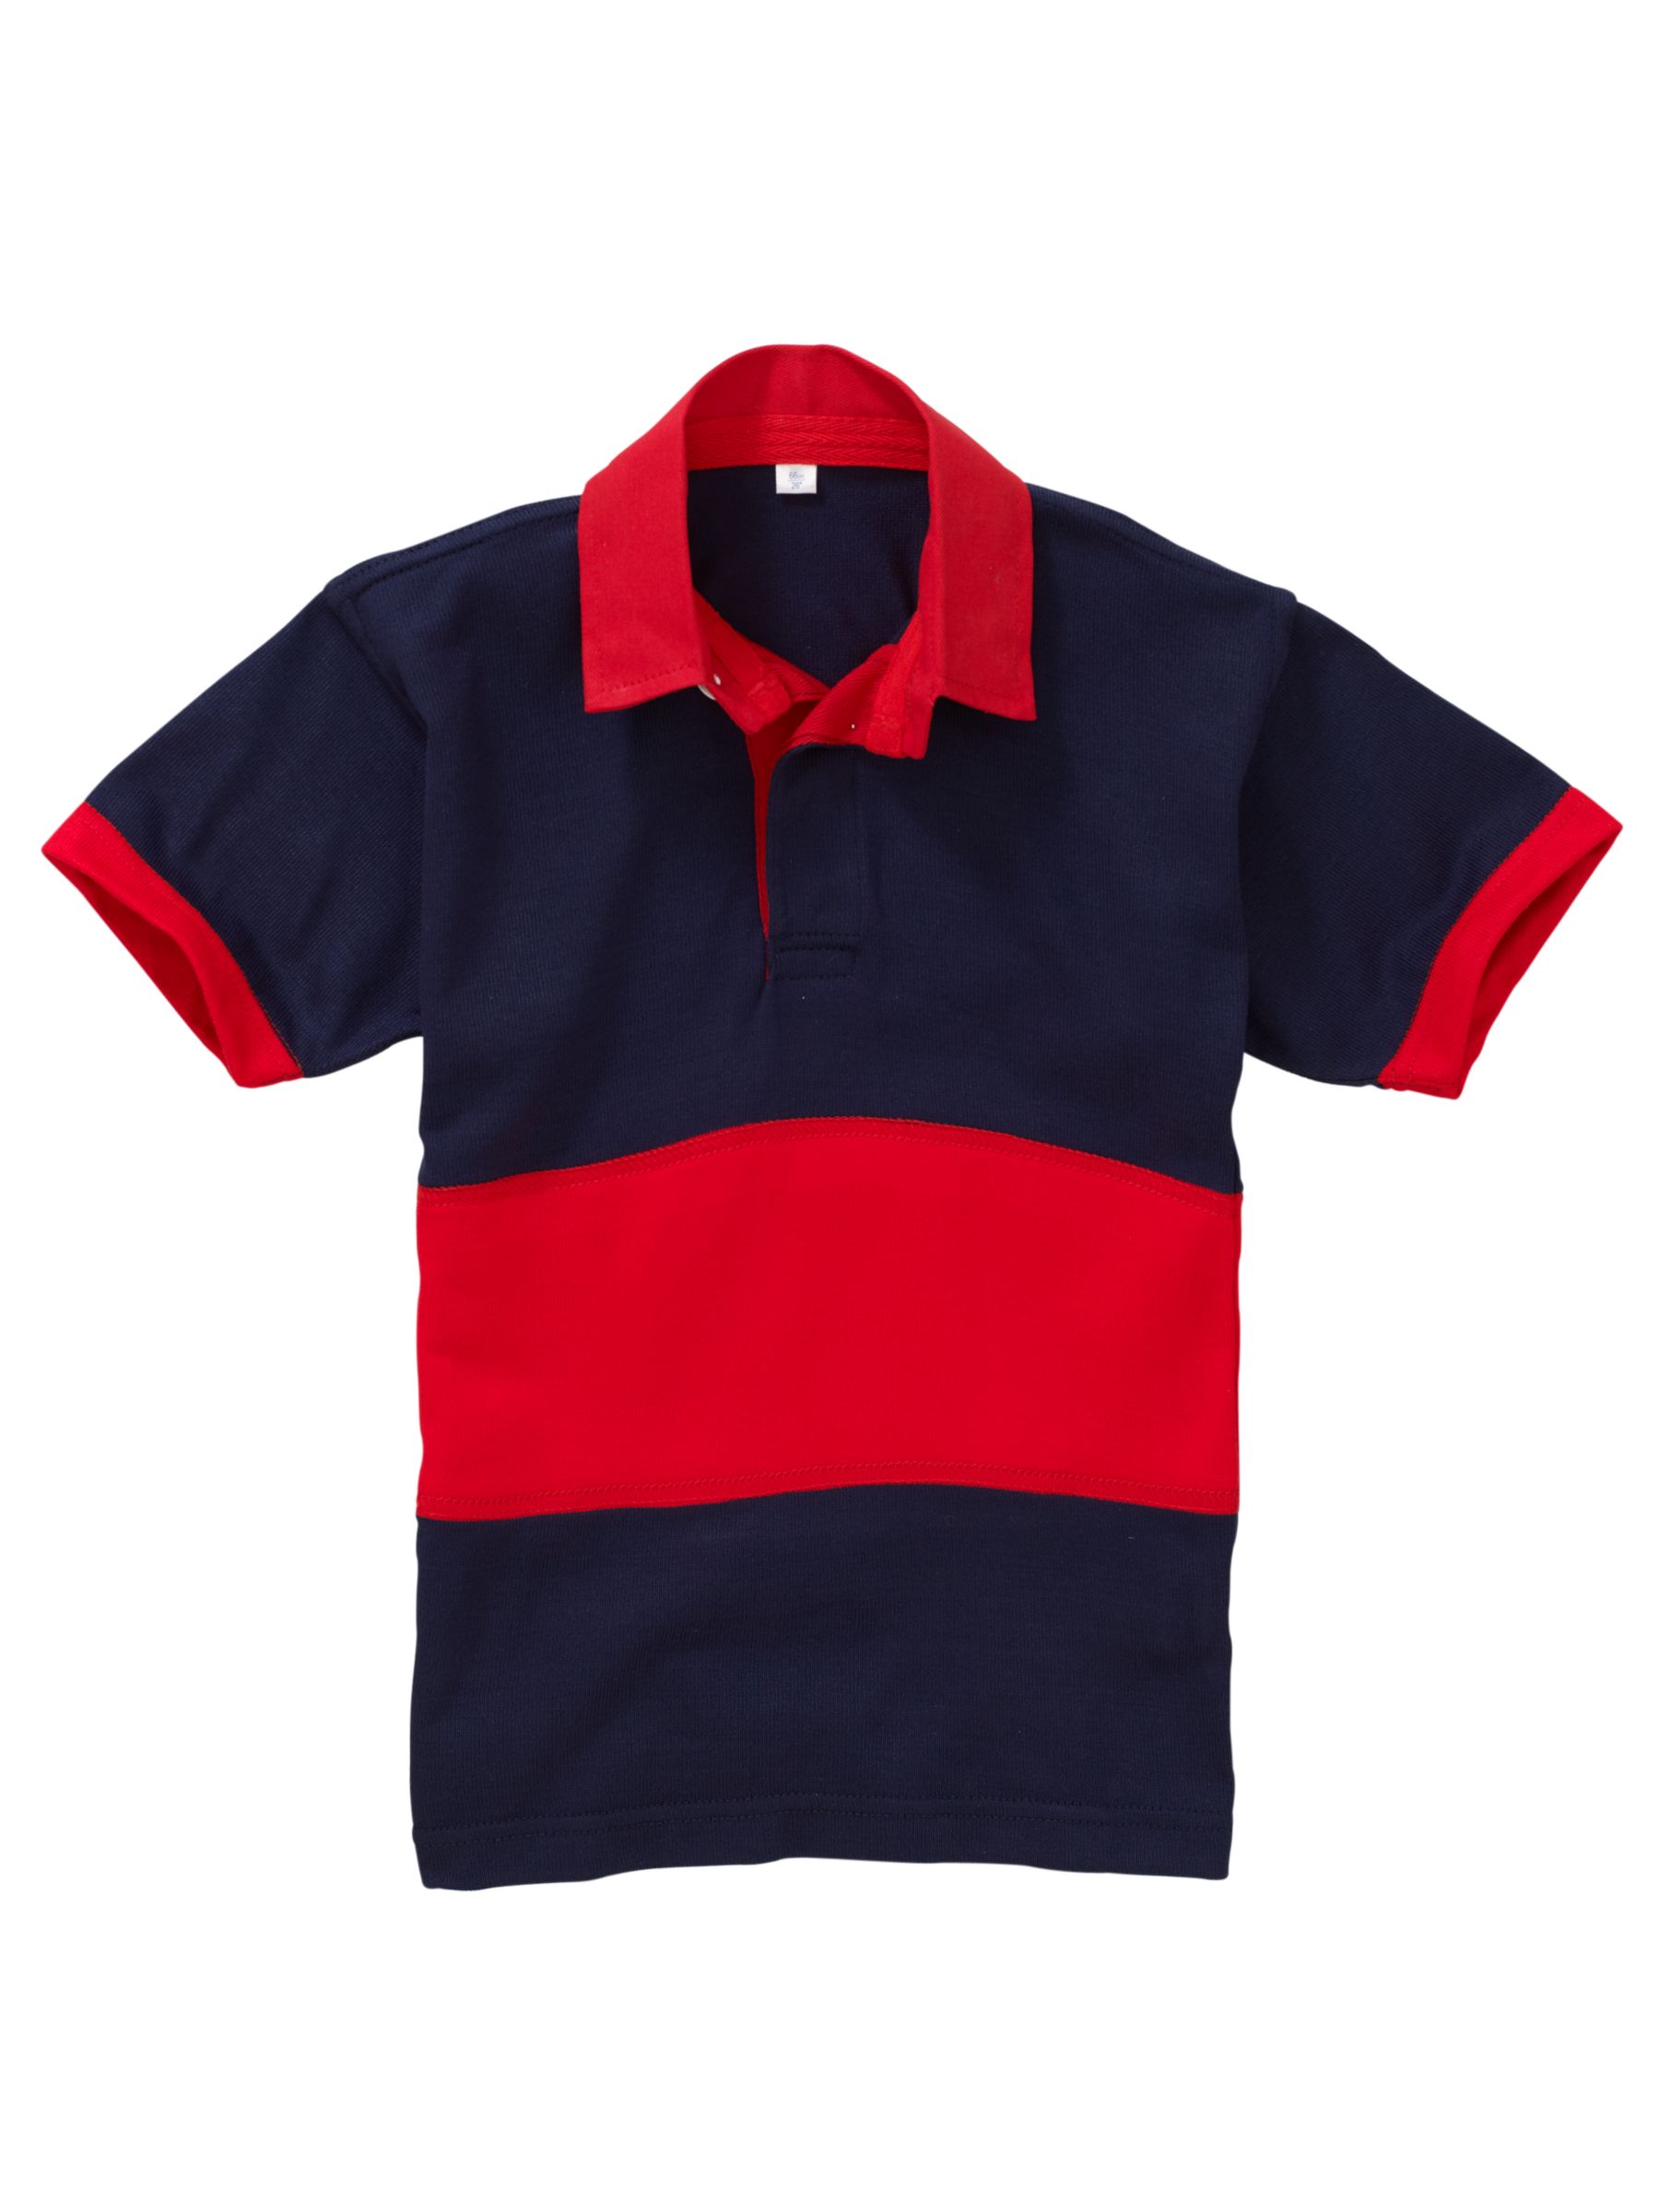 Other Schools School Boys Rugby Shirt, Blue/red